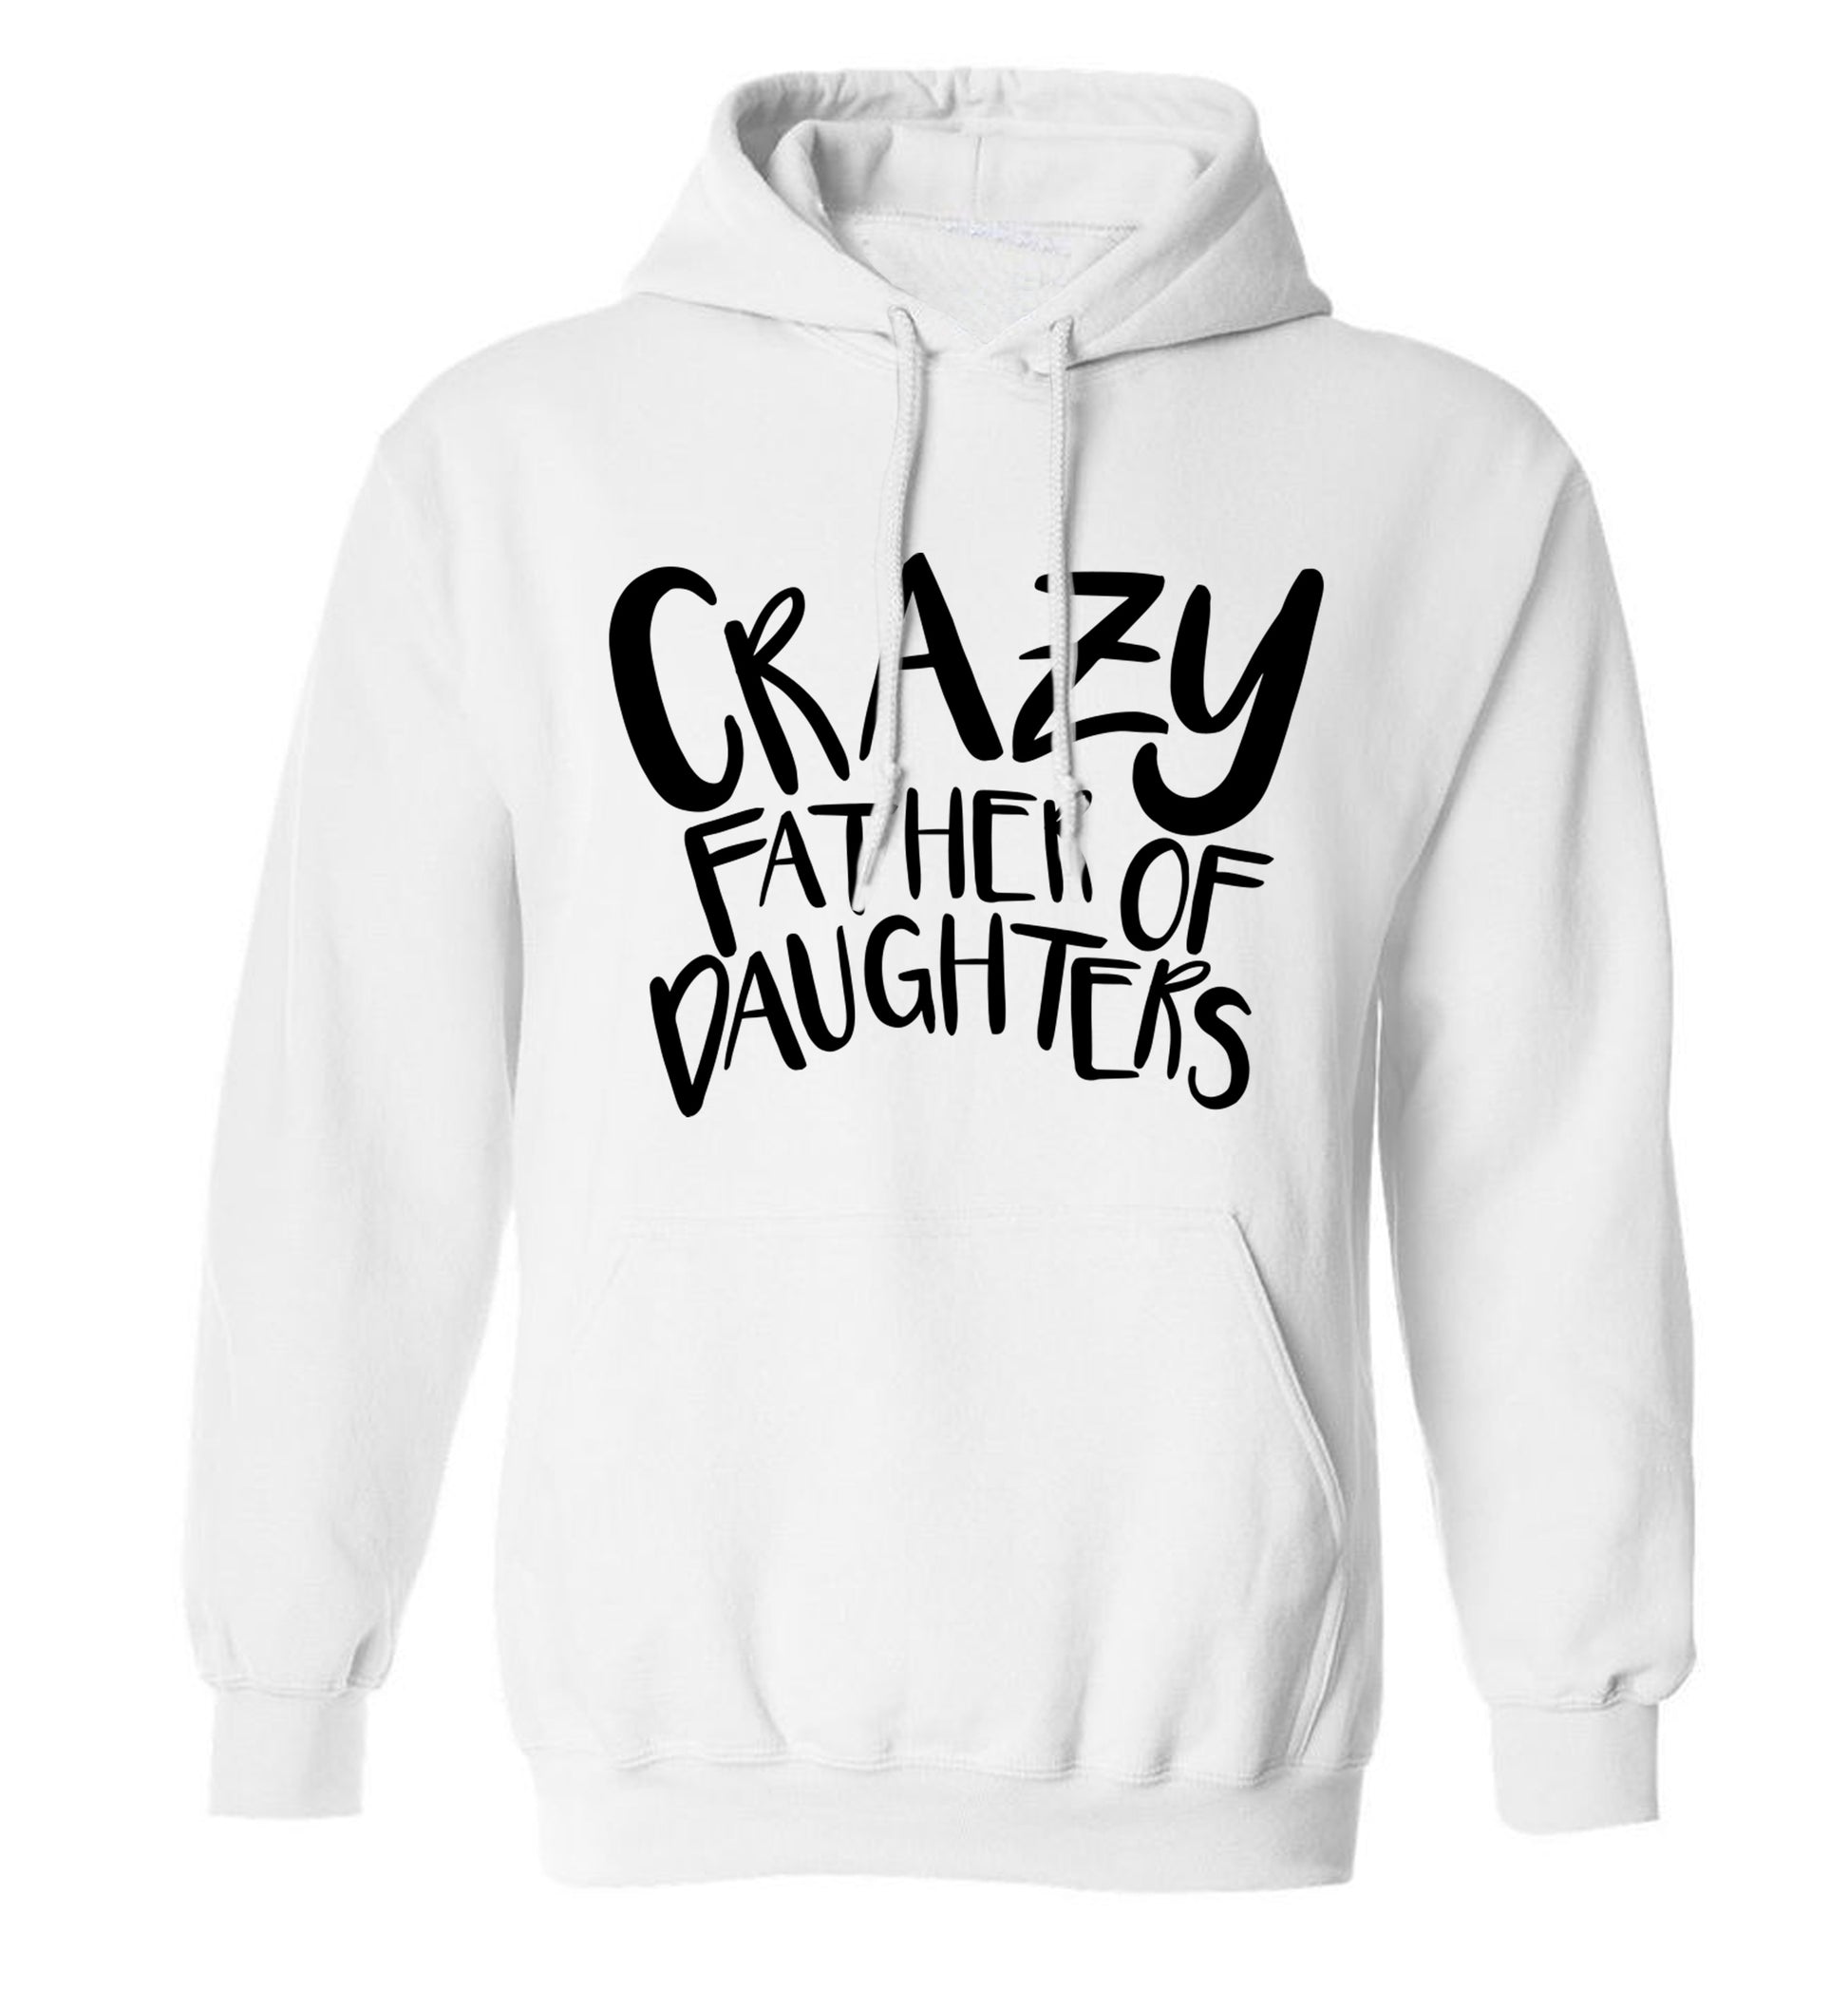 Crazy father of daughters adults unisex white hoodie 2XL